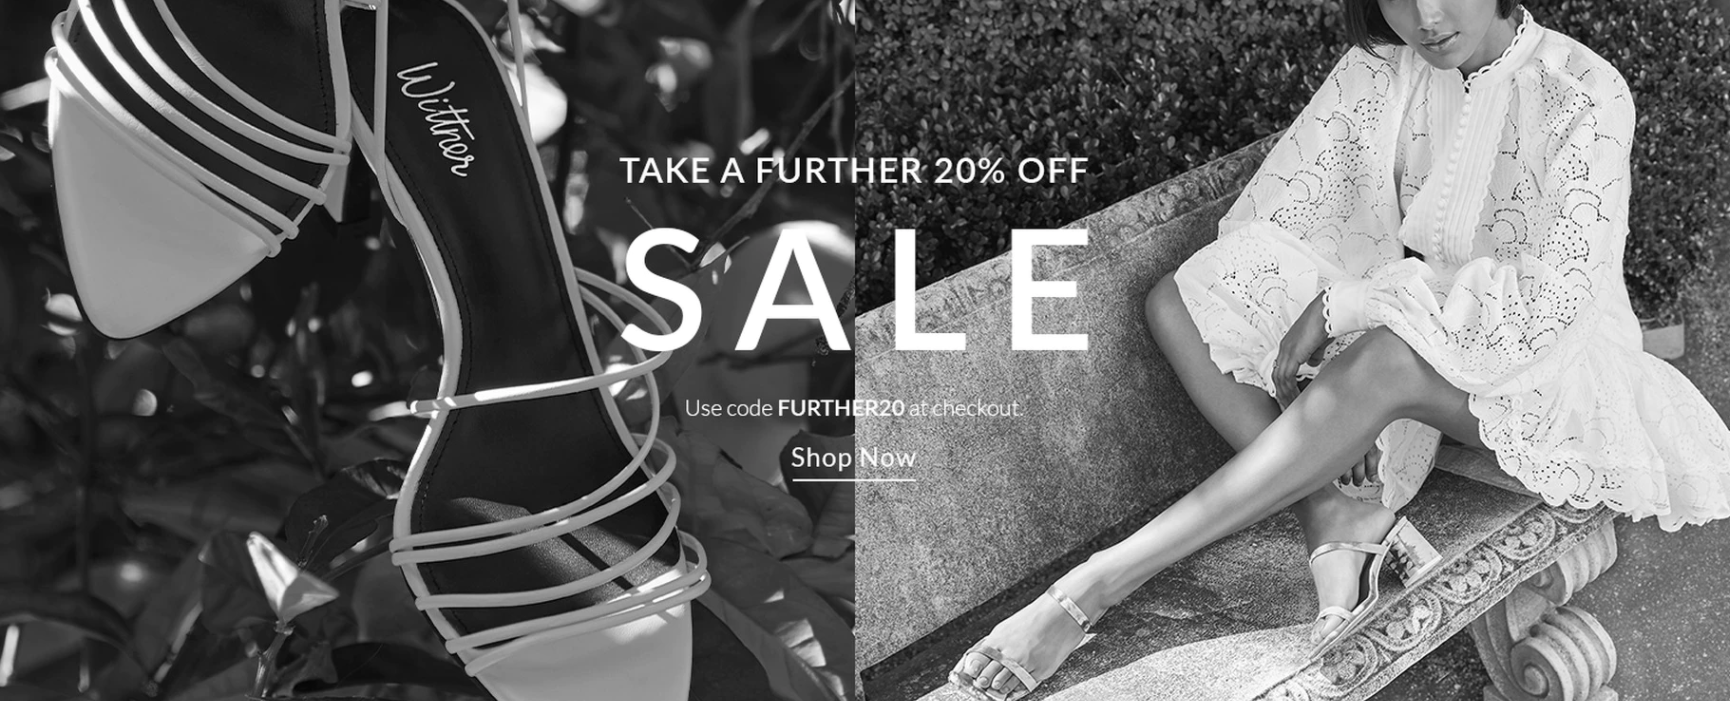 Take a further extra 20% OFF on sale items